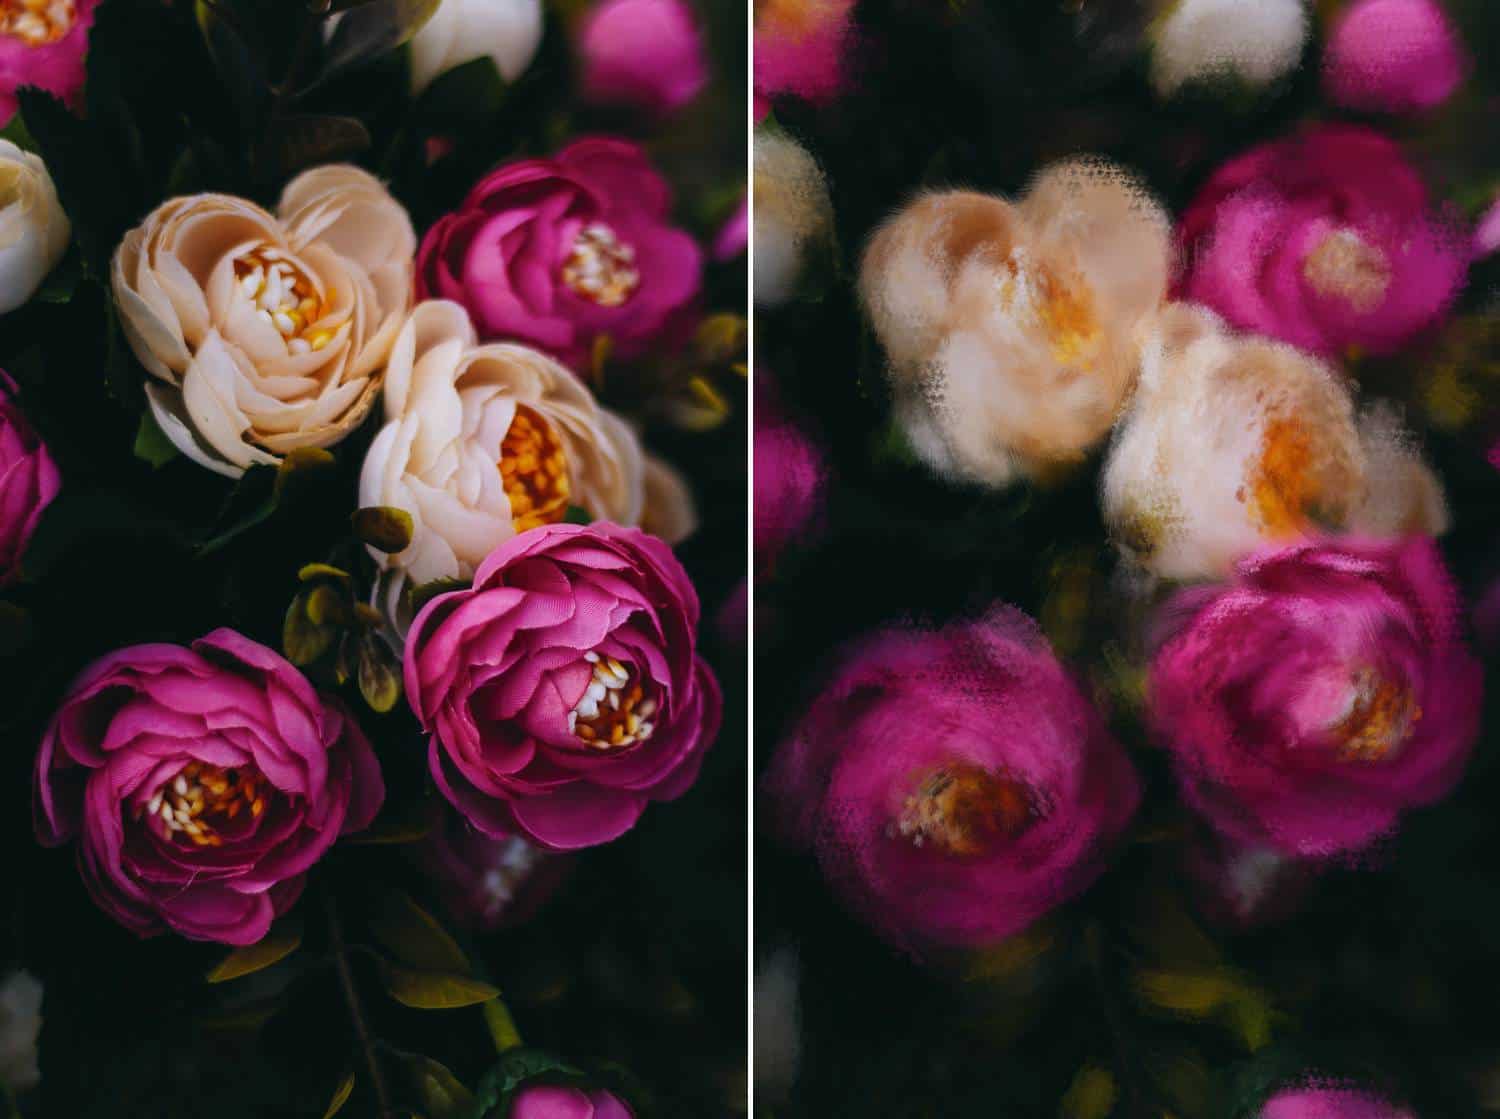 A dim, moody, close-up photograph of pink and peach roses is depicted twice: once in an unedited version, and once with a Photoshop brush applied to make the image look like a painting.